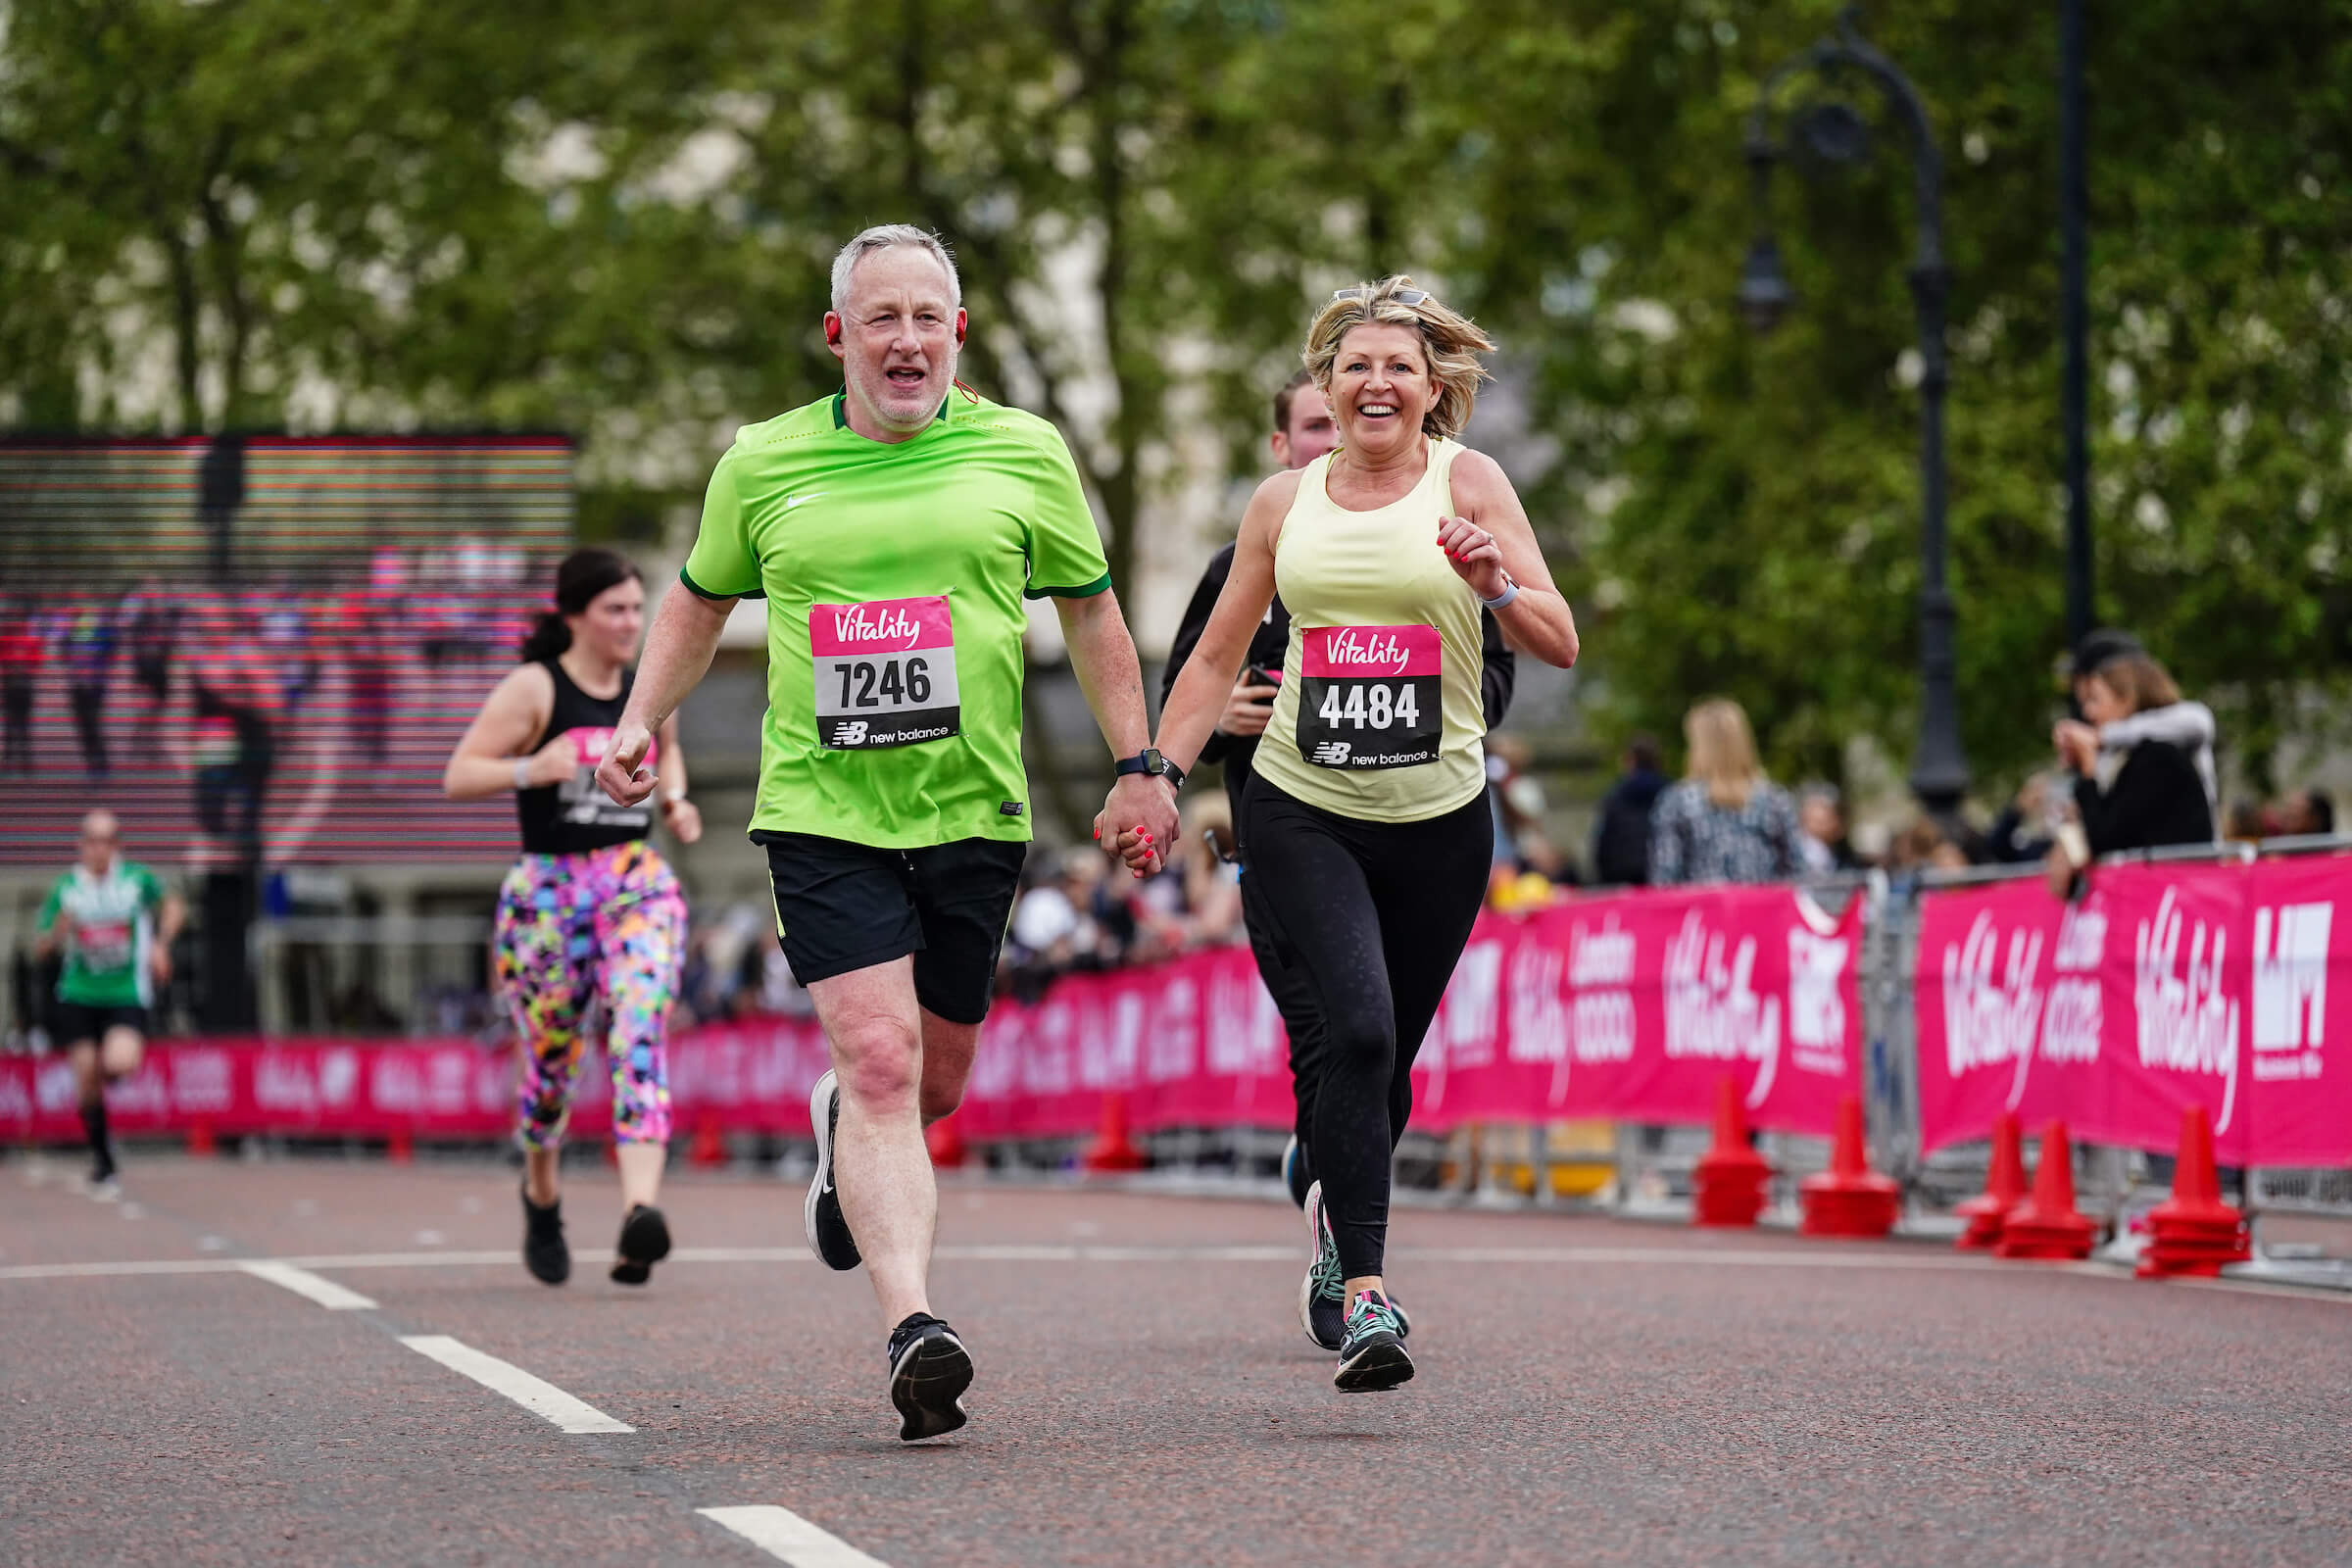 Participants holding hands at the Vitality London 10,000